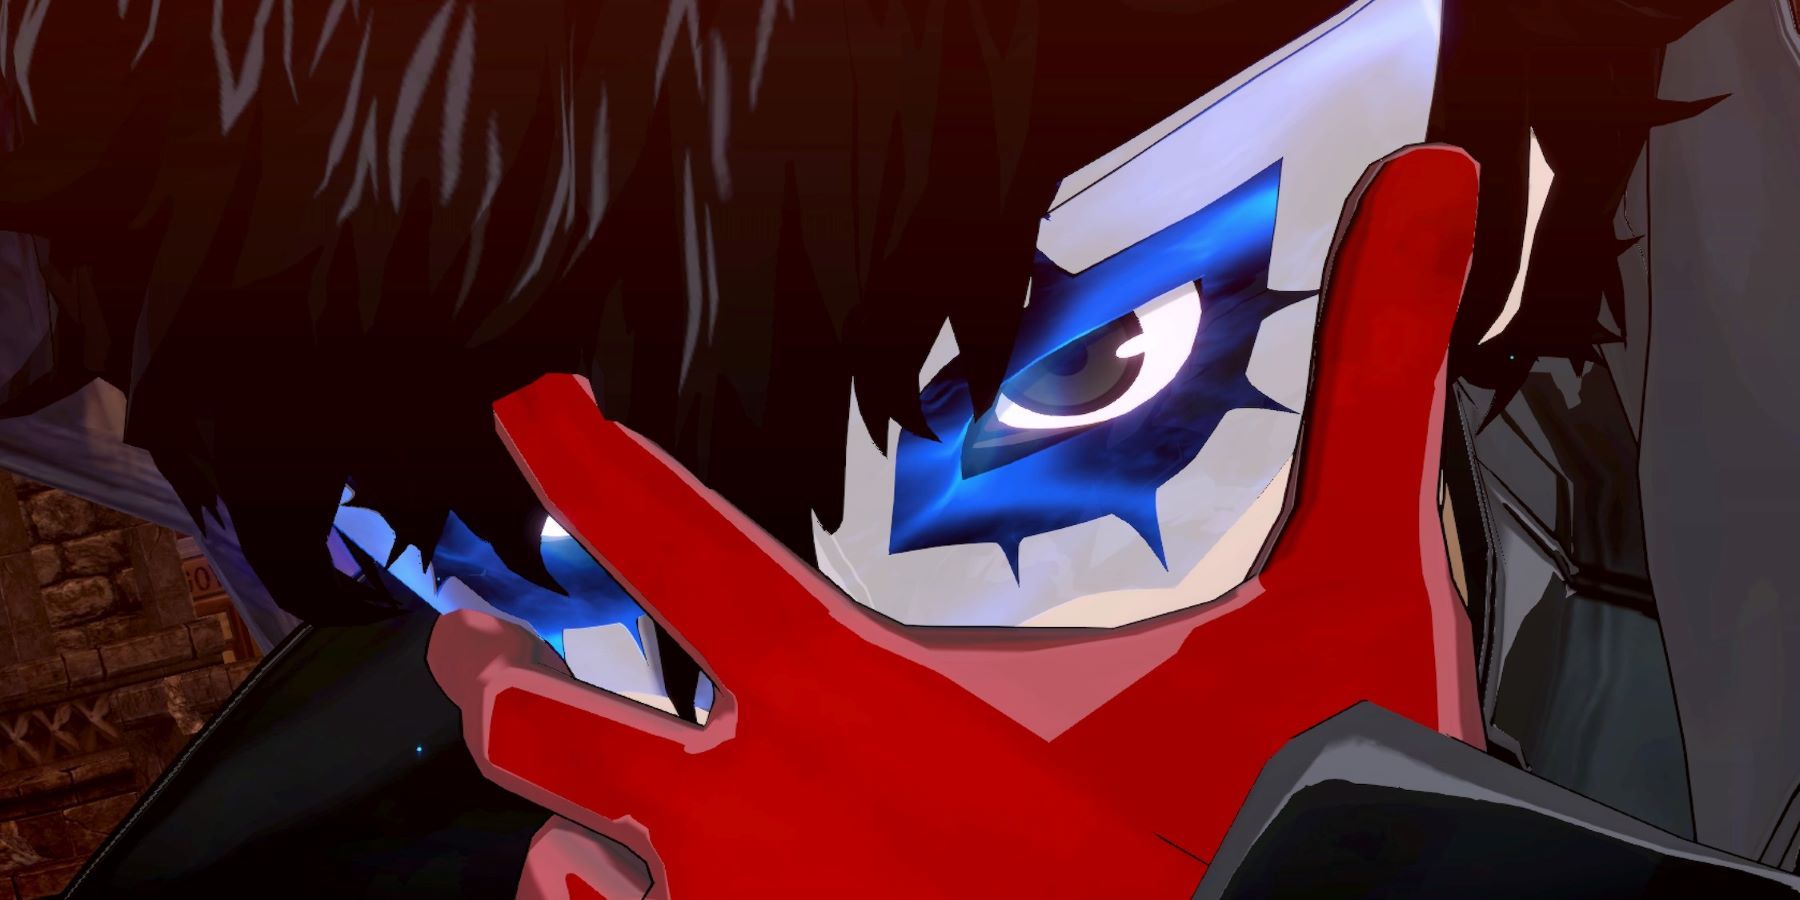 Why Persona 6 Shouldn’t Follow the Action RPG Trend